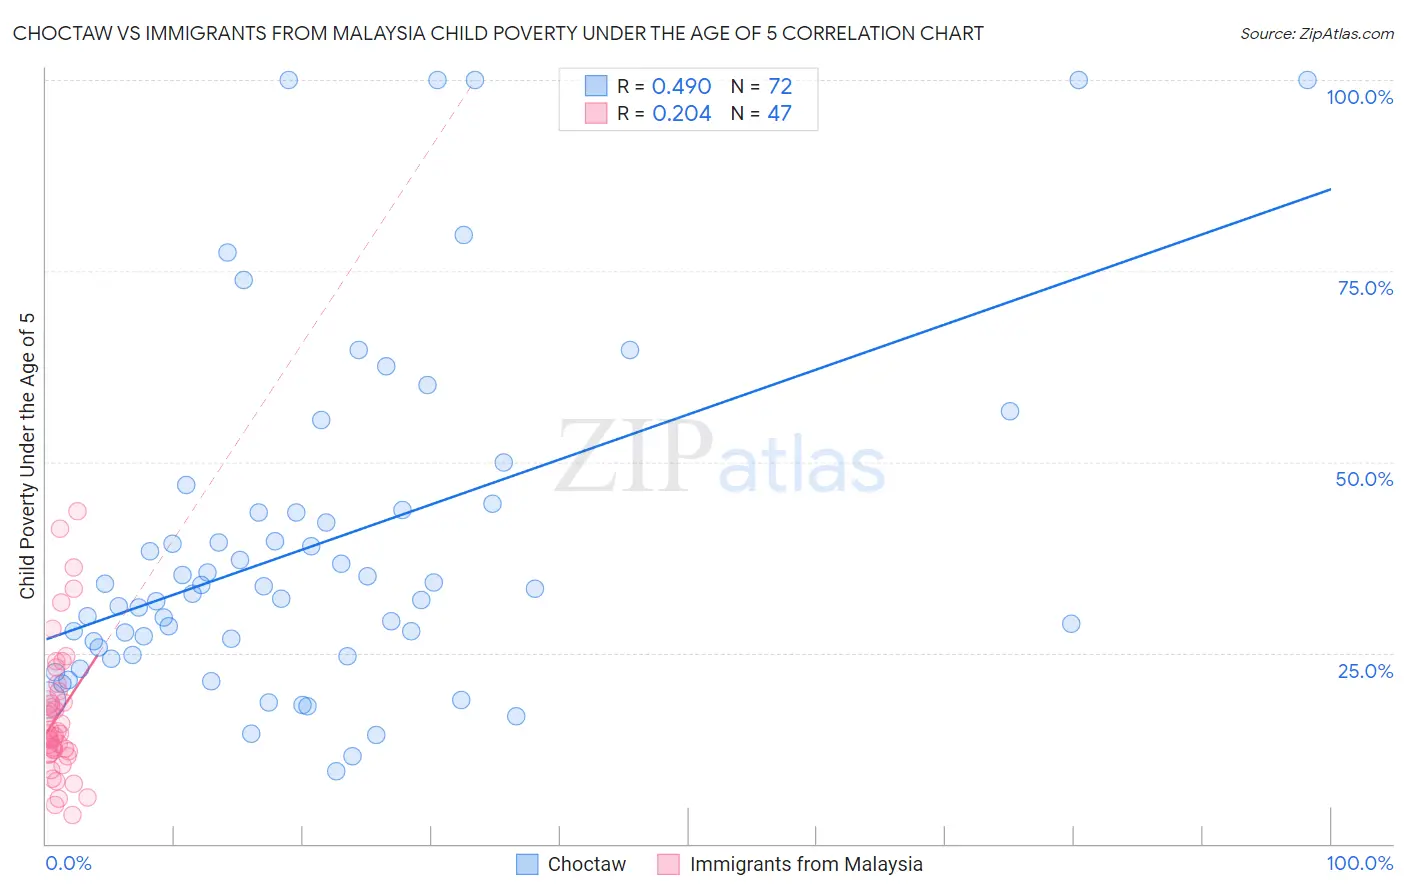 Choctaw vs Immigrants from Malaysia Child Poverty Under the Age of 5